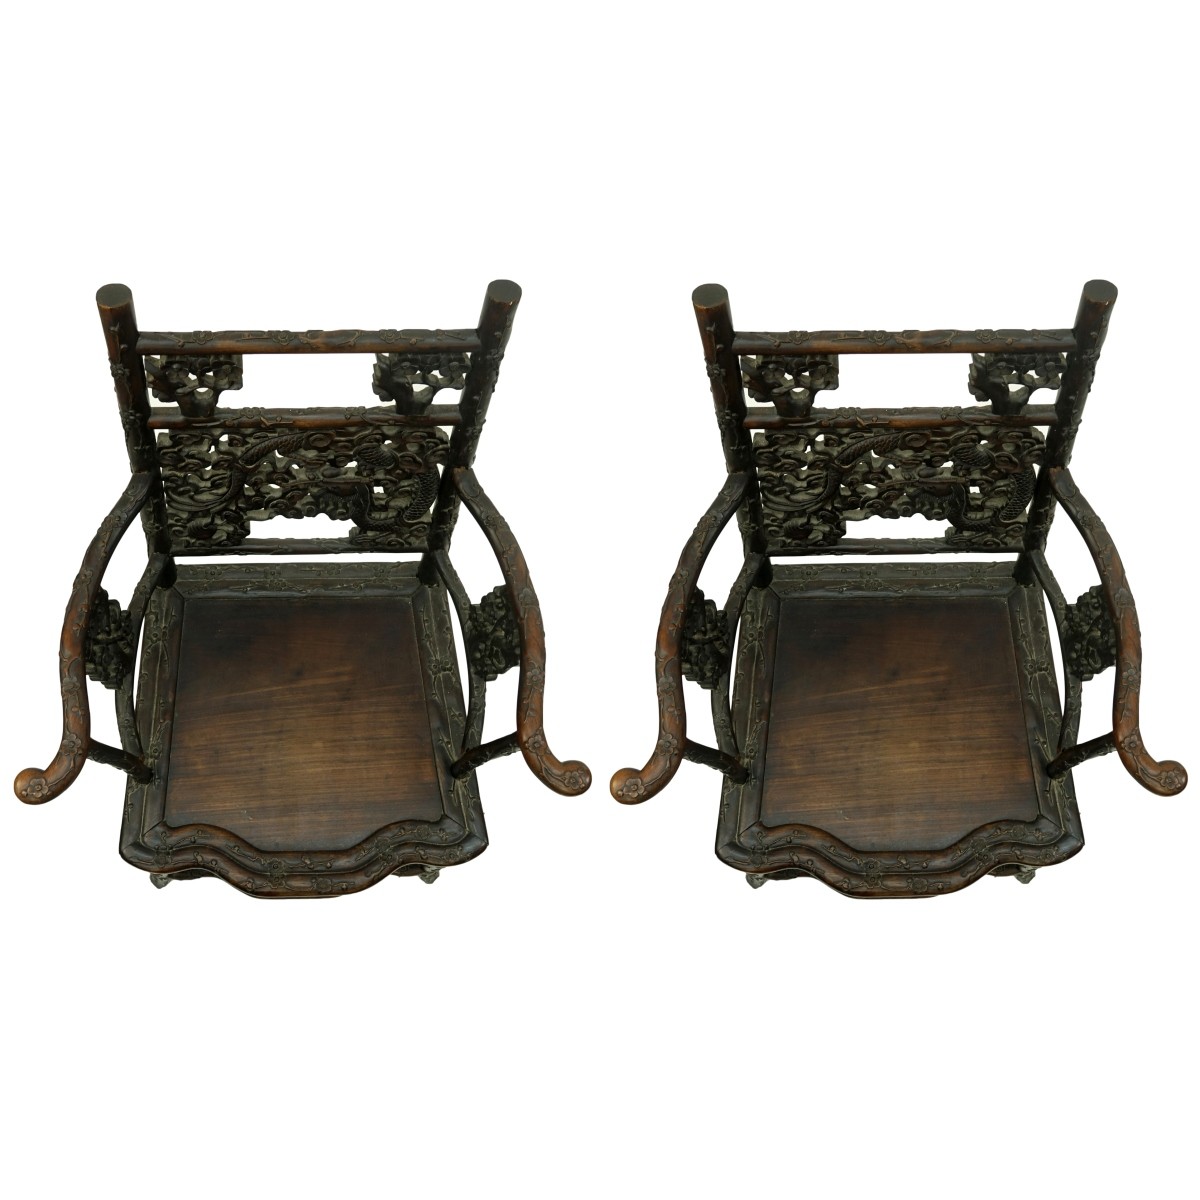 Pair of 19th C. Chinese Carved Wood Throne Chairs